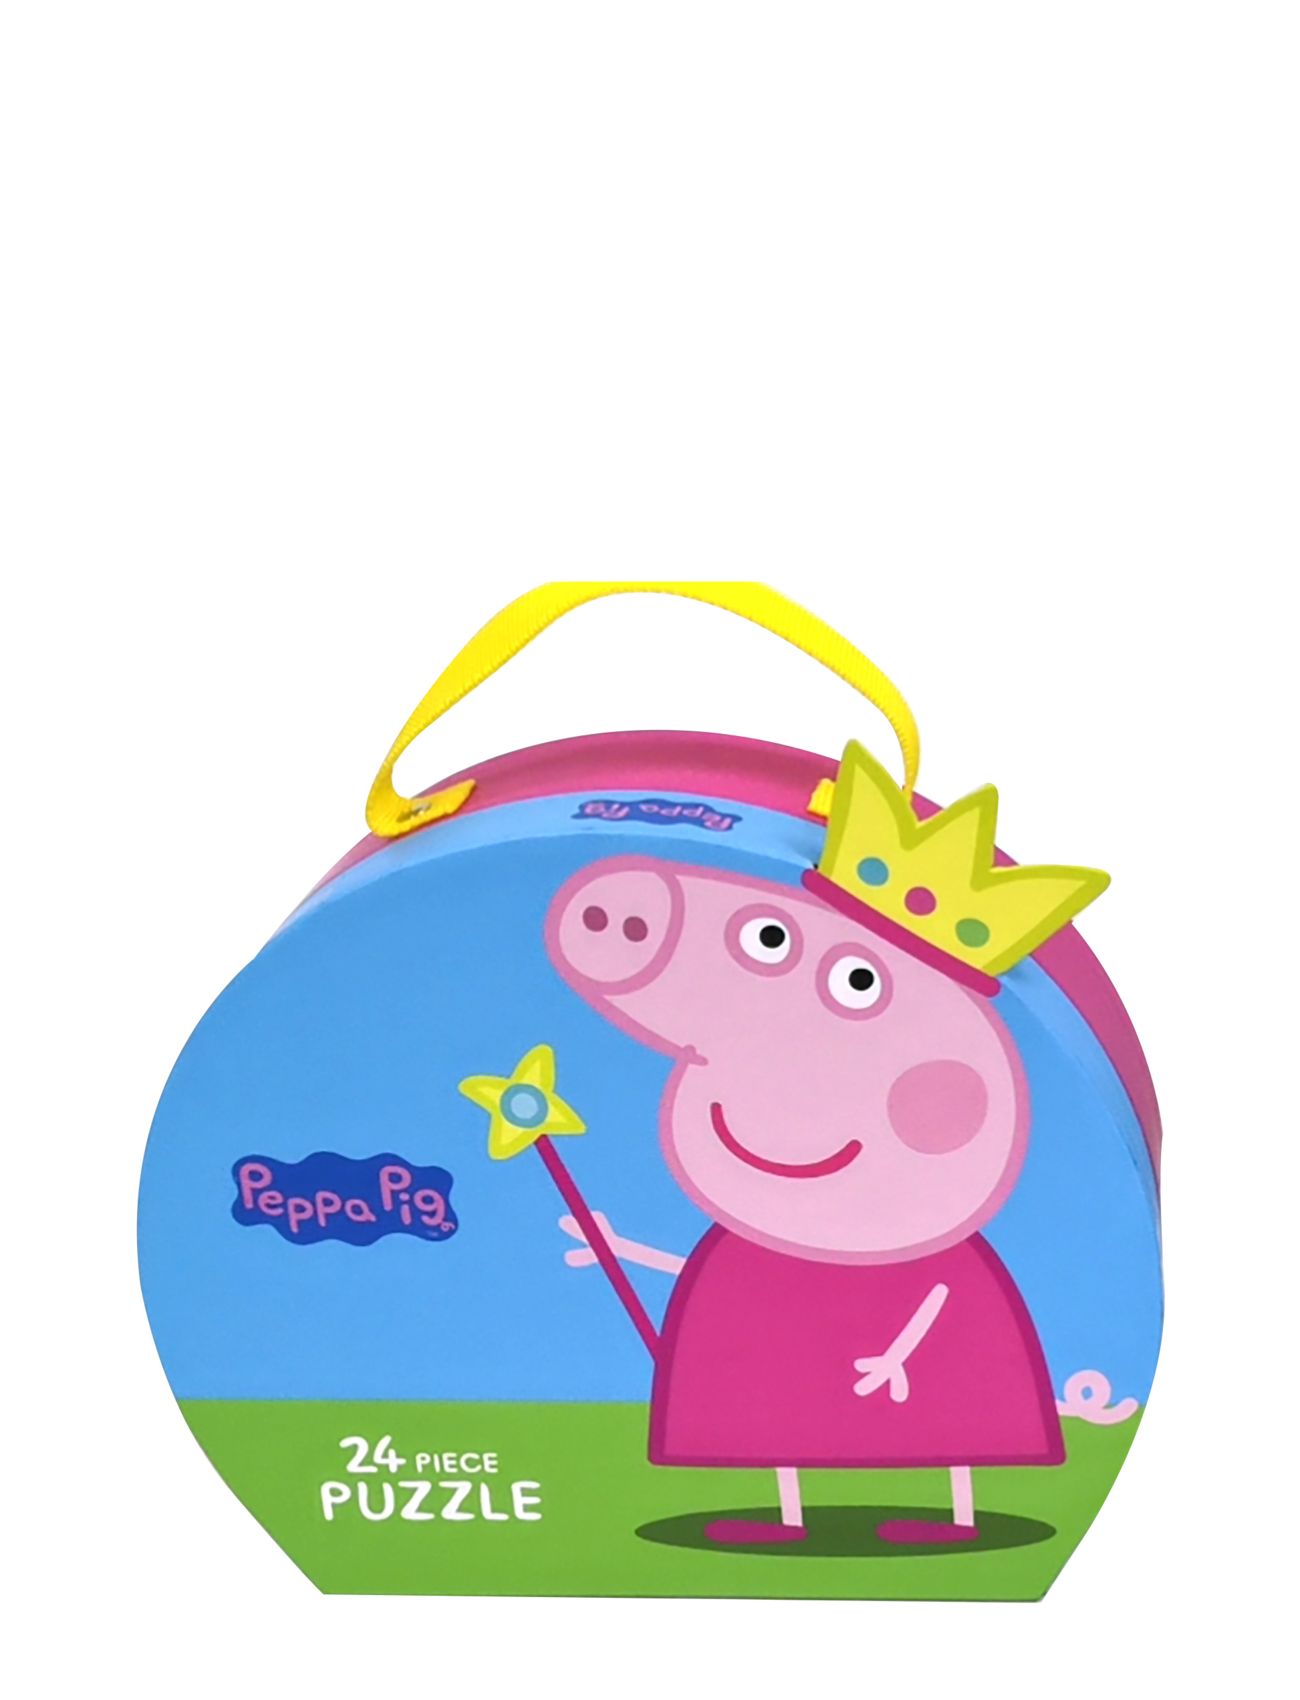 Peppa Pig - Princess Puzzle Suitcase Toys Puzzles And Games Puzzles Classic Puzzles Multi/patterned Gurli Gris